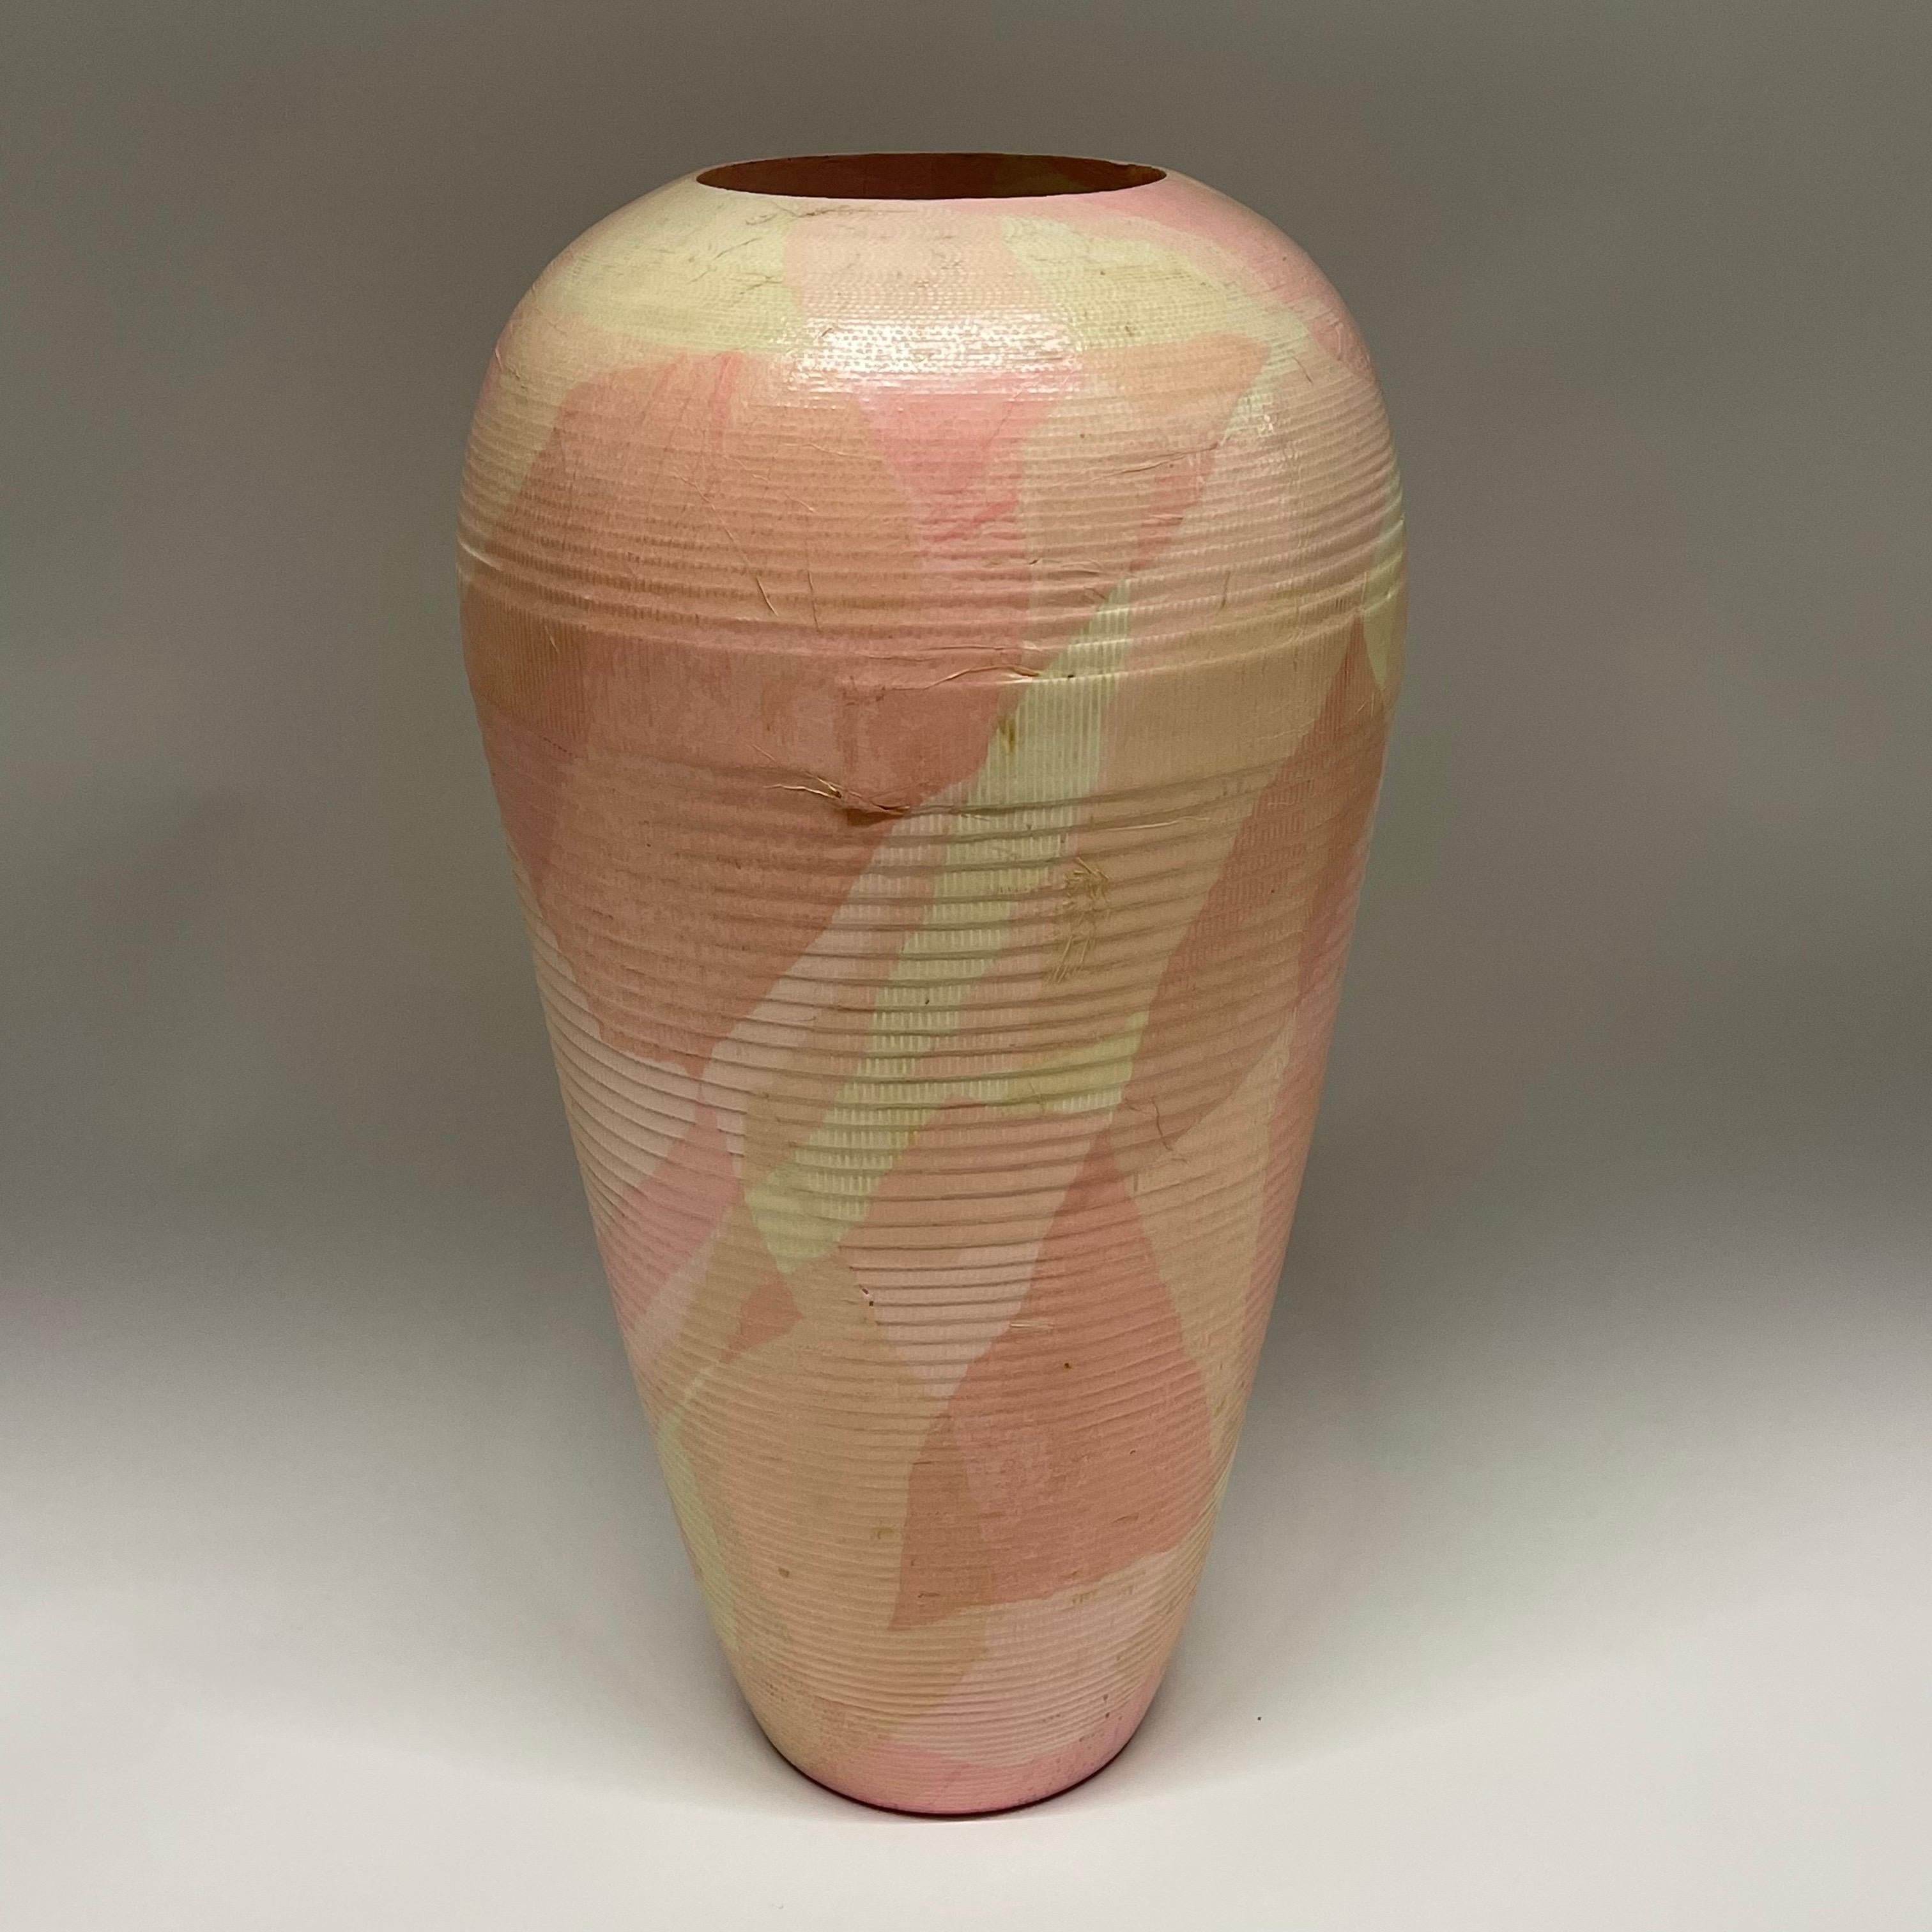 Hand-Painted Post Modern Hand Painted Corrugated Cardboard Vase by Flute, Chicago, c 1989 For Sale